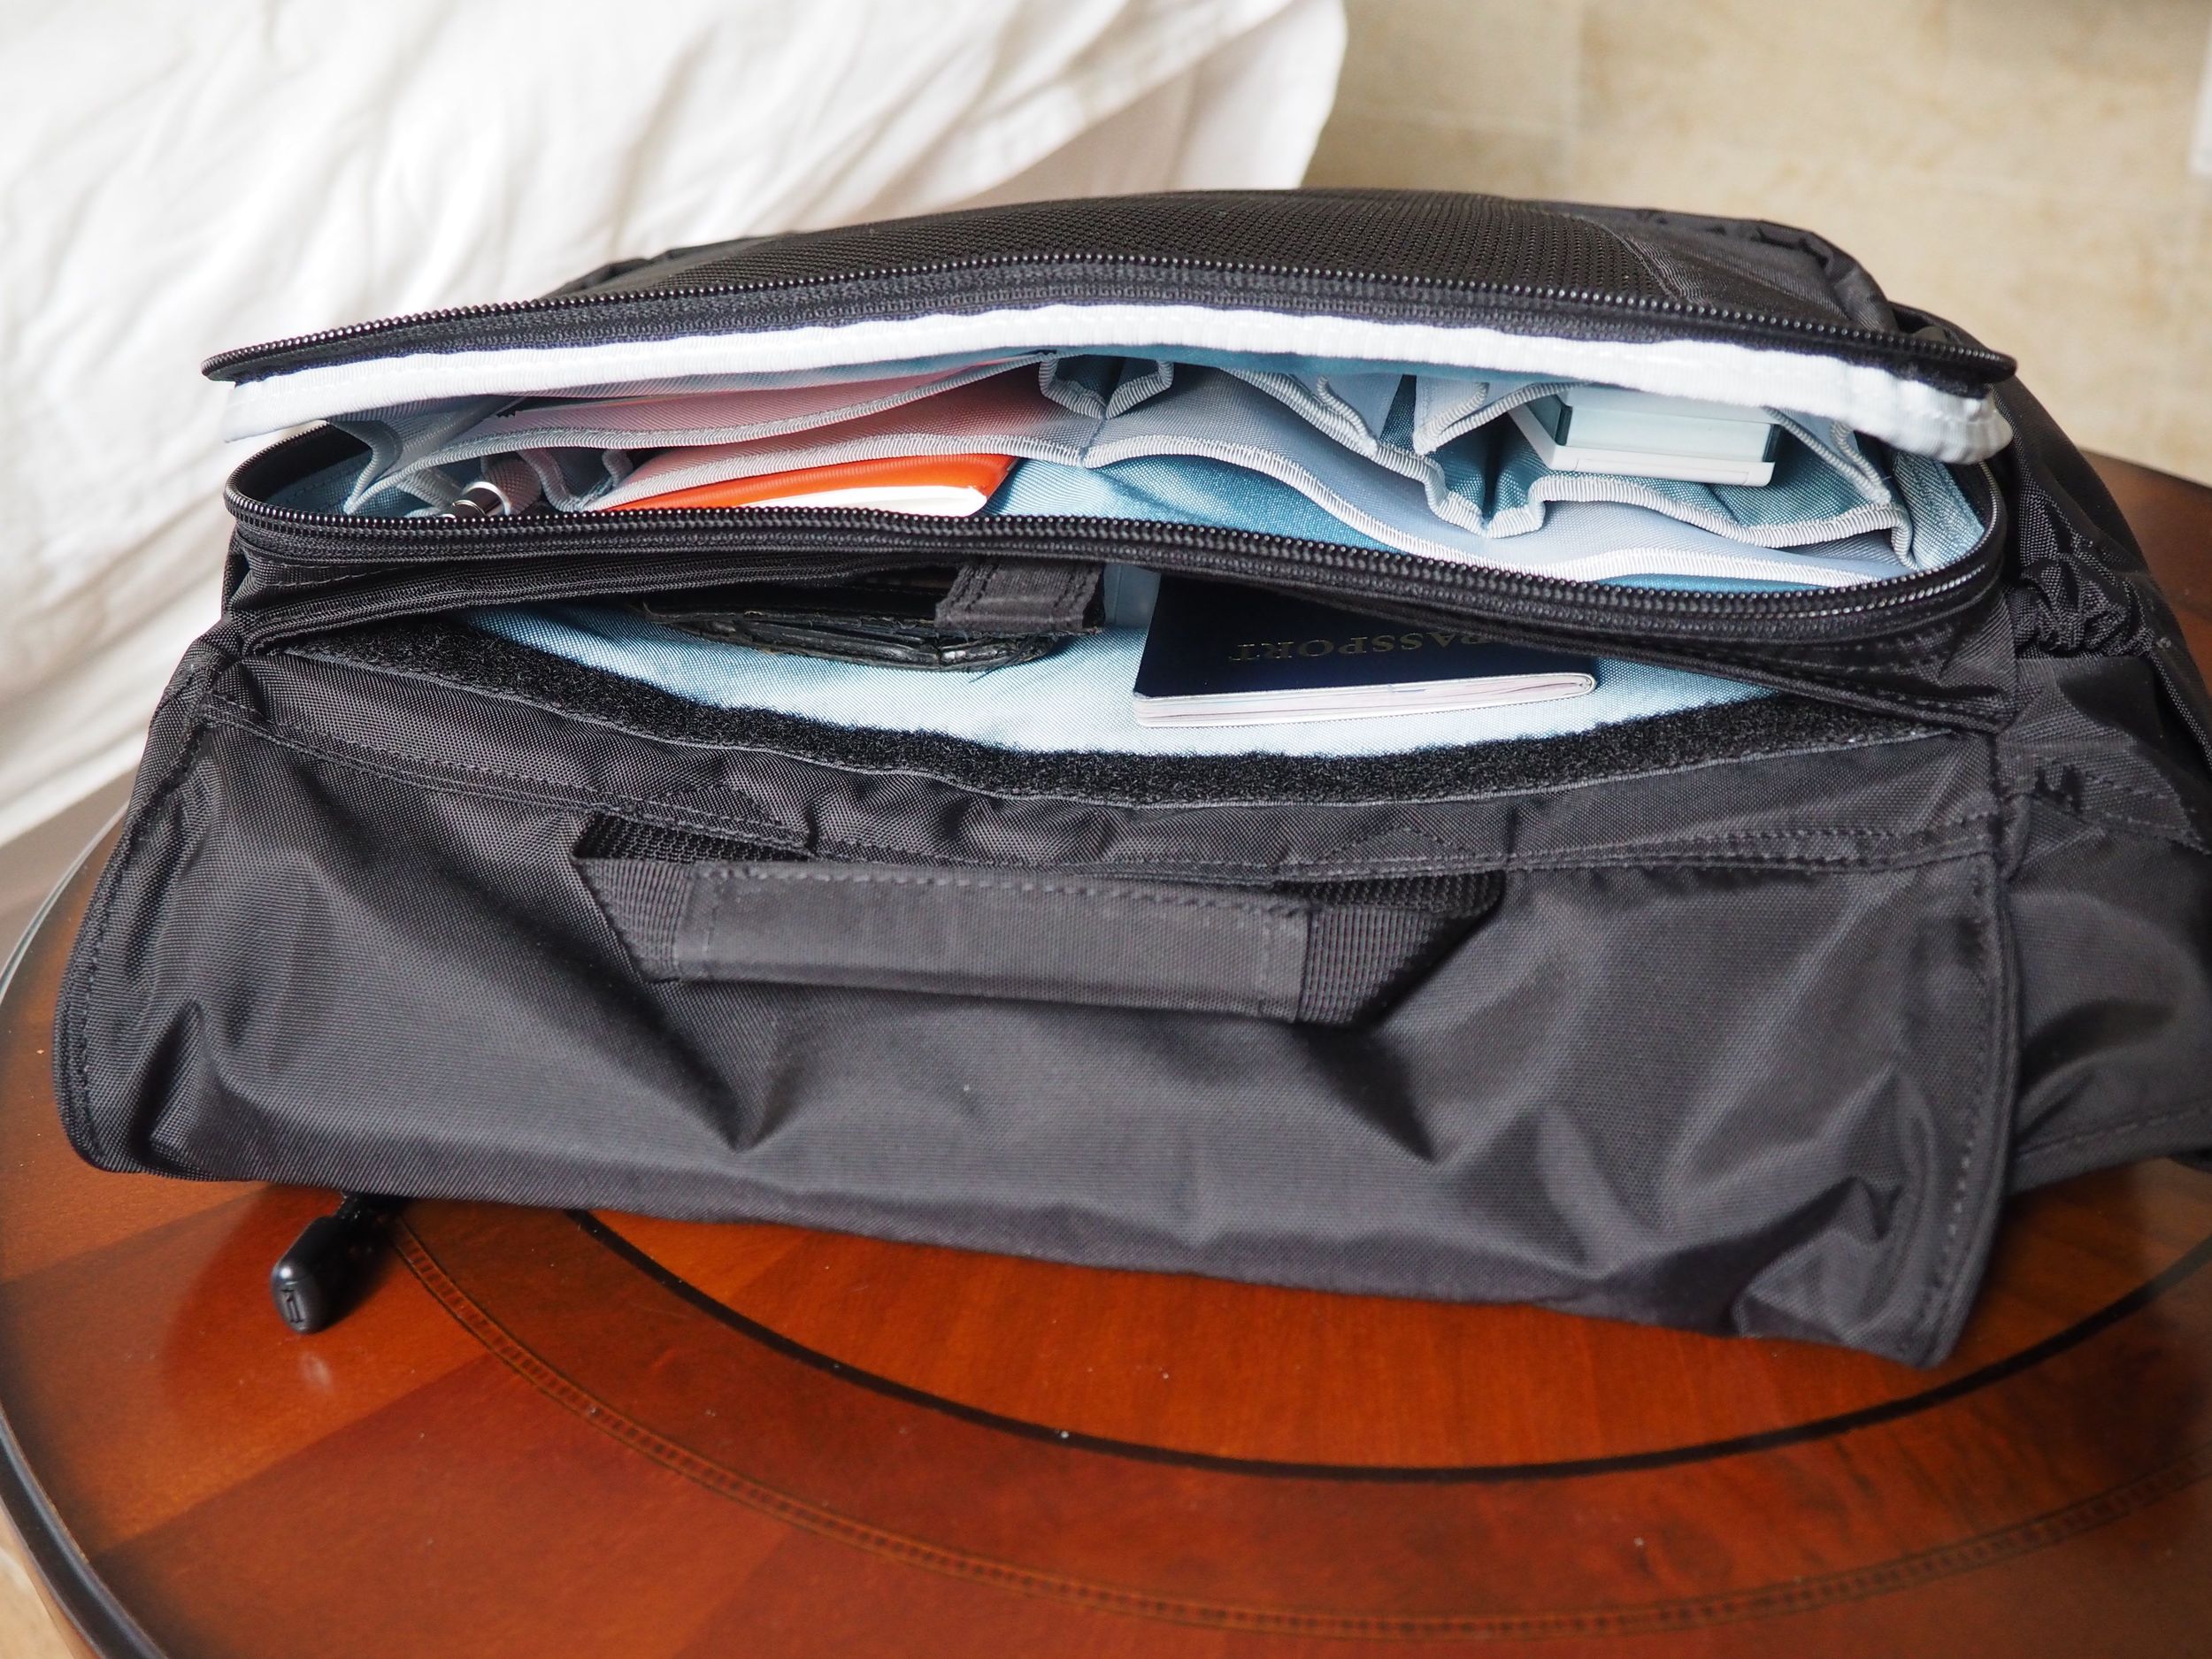 wise-walker OS-01 urban day bag back compartment